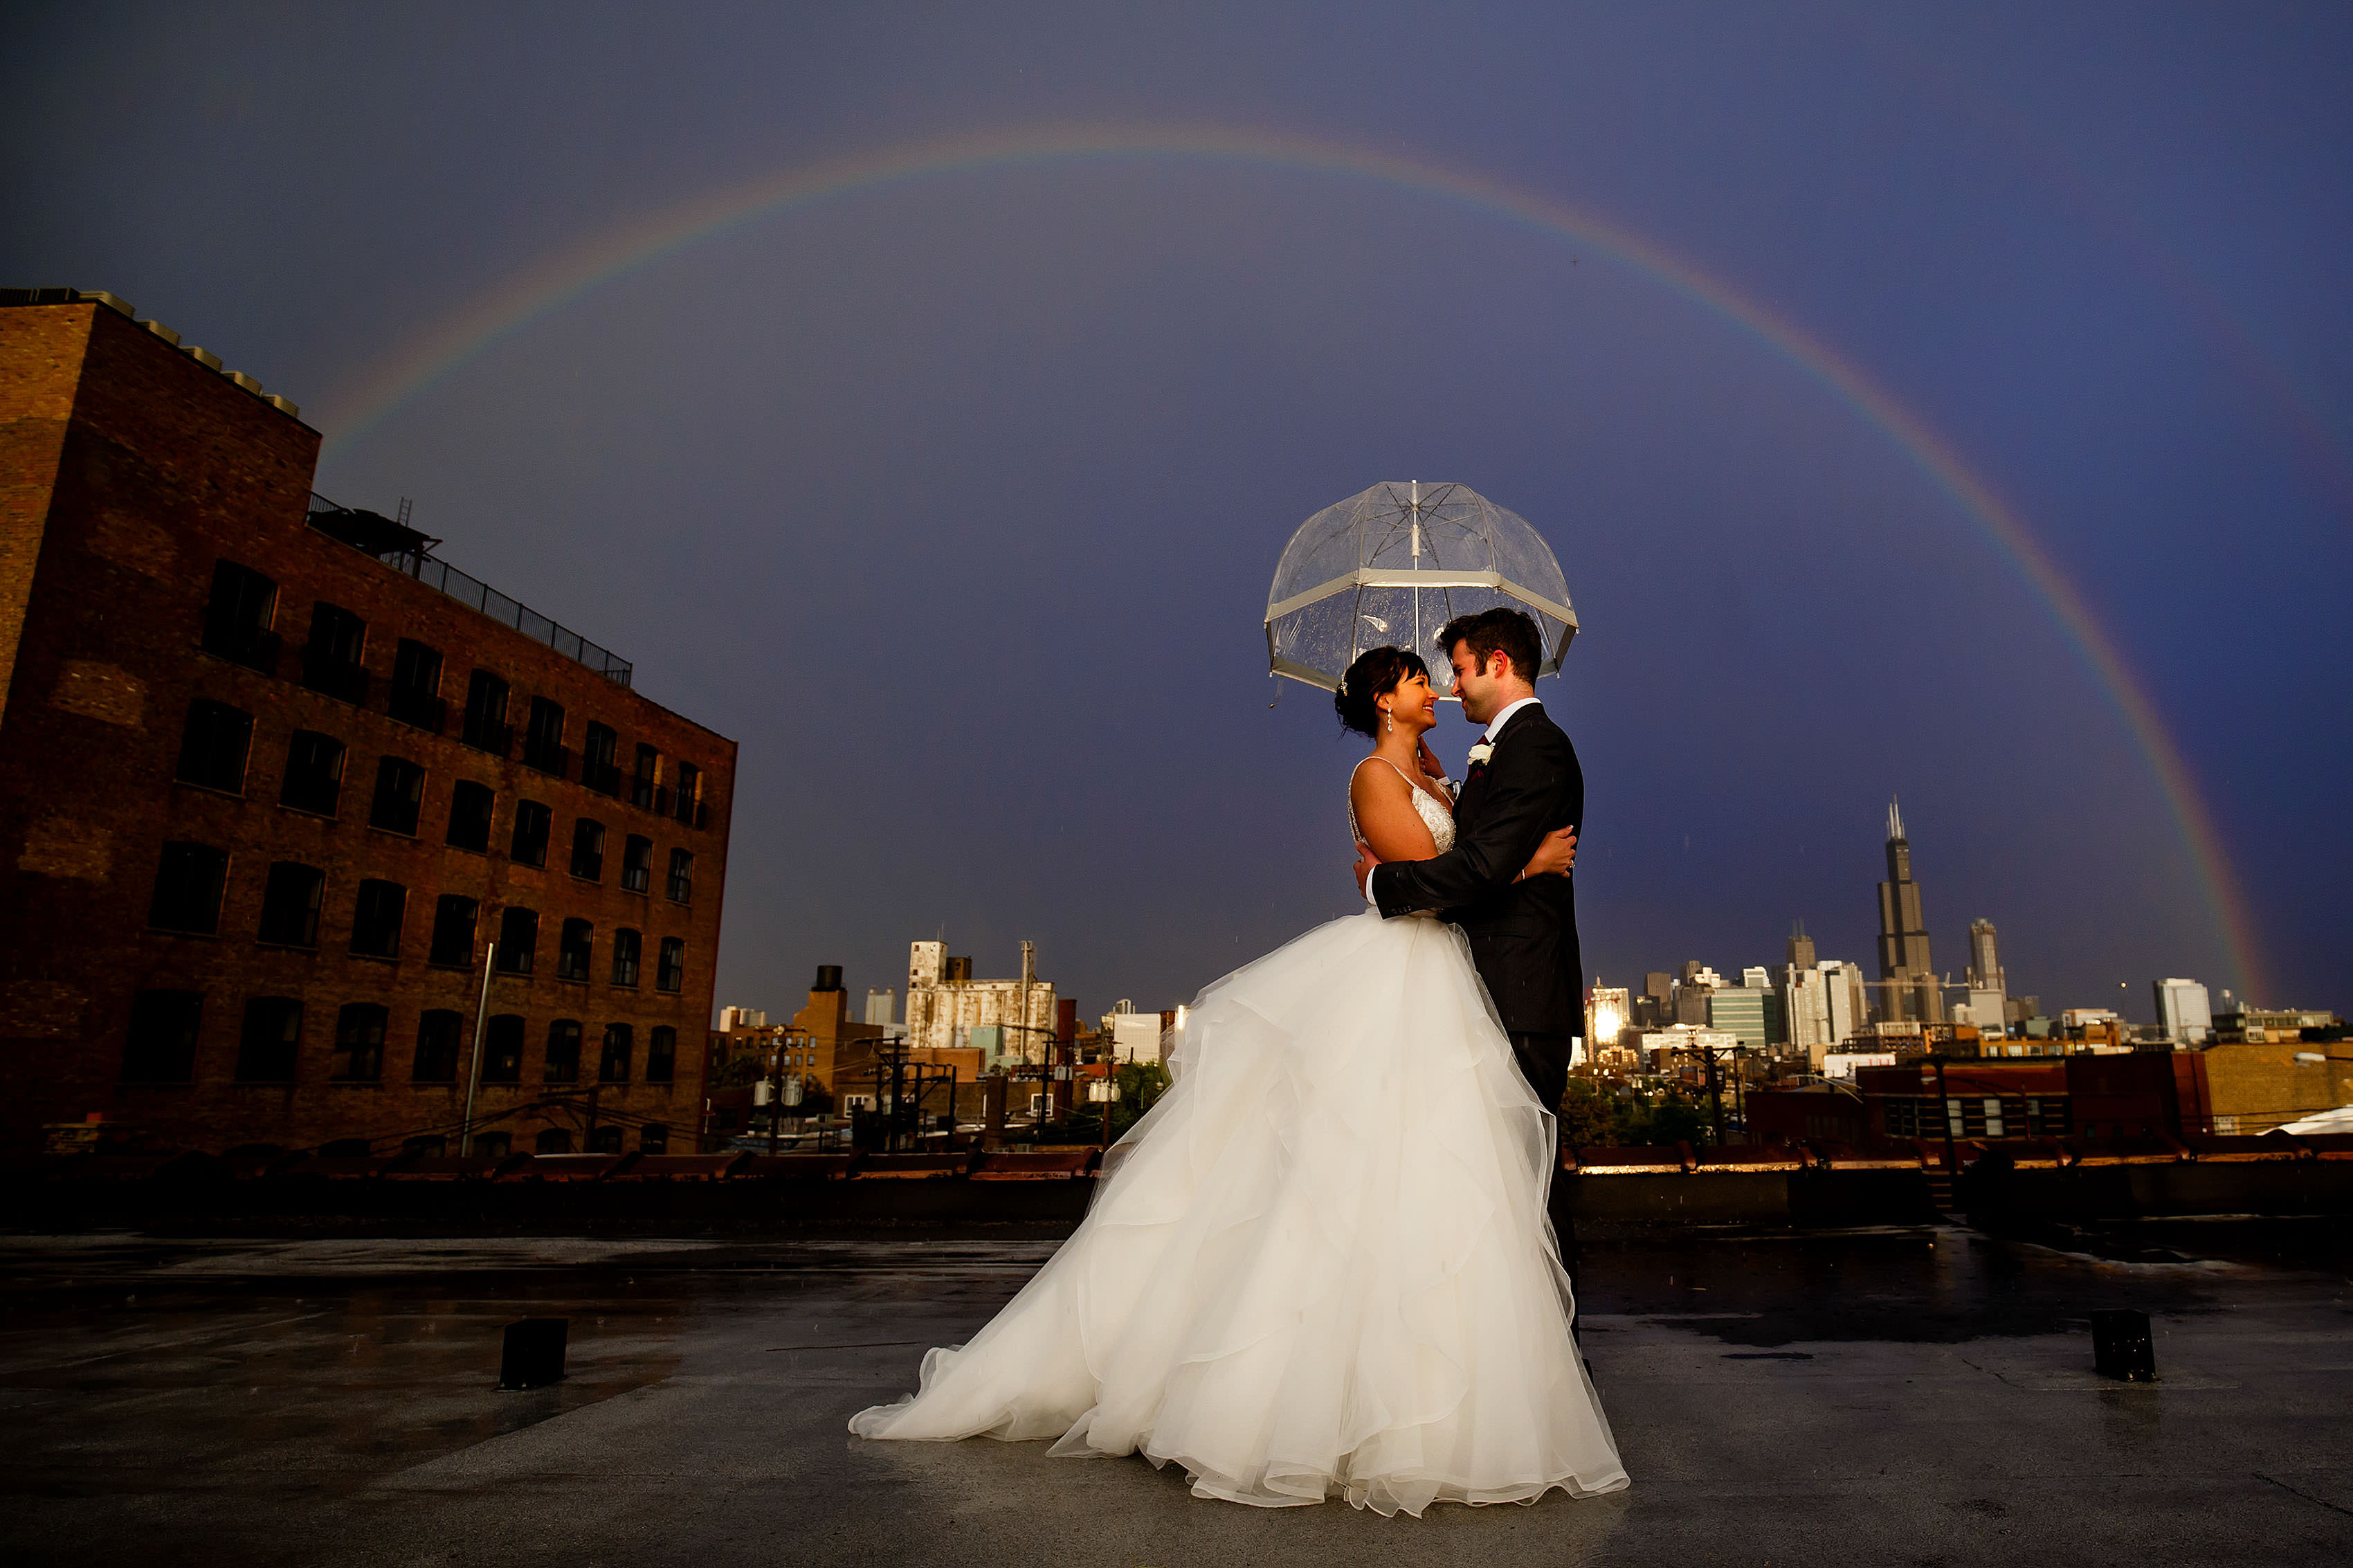 The bride and Groom embrace under an umbrella and surrounded by a rainbow on the rooftop during their Room 1520 wedding in Chicago